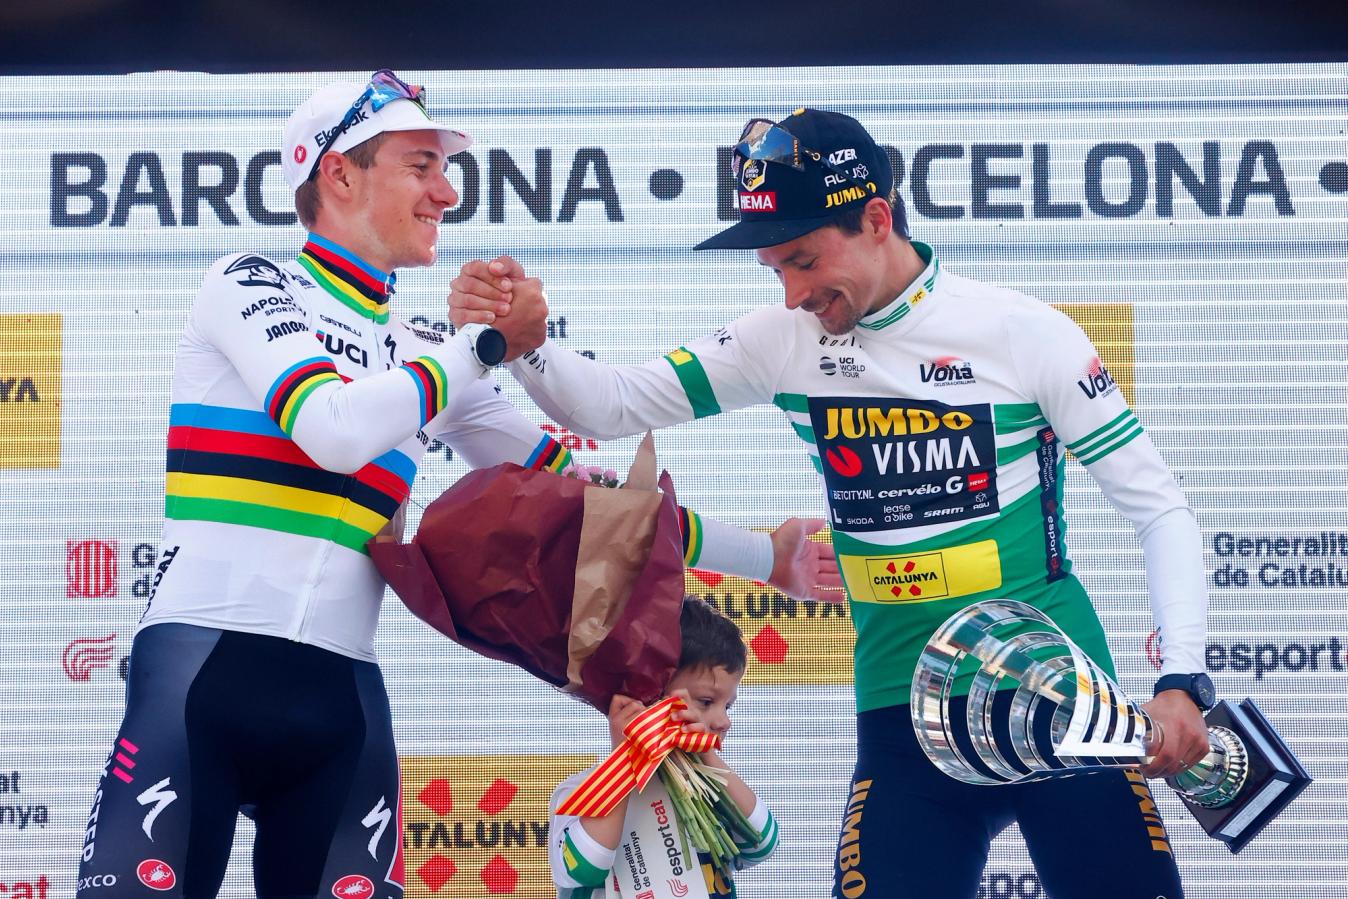 Roglič is taking on a younger cast of competitors, including Remco Evenepoel (left)